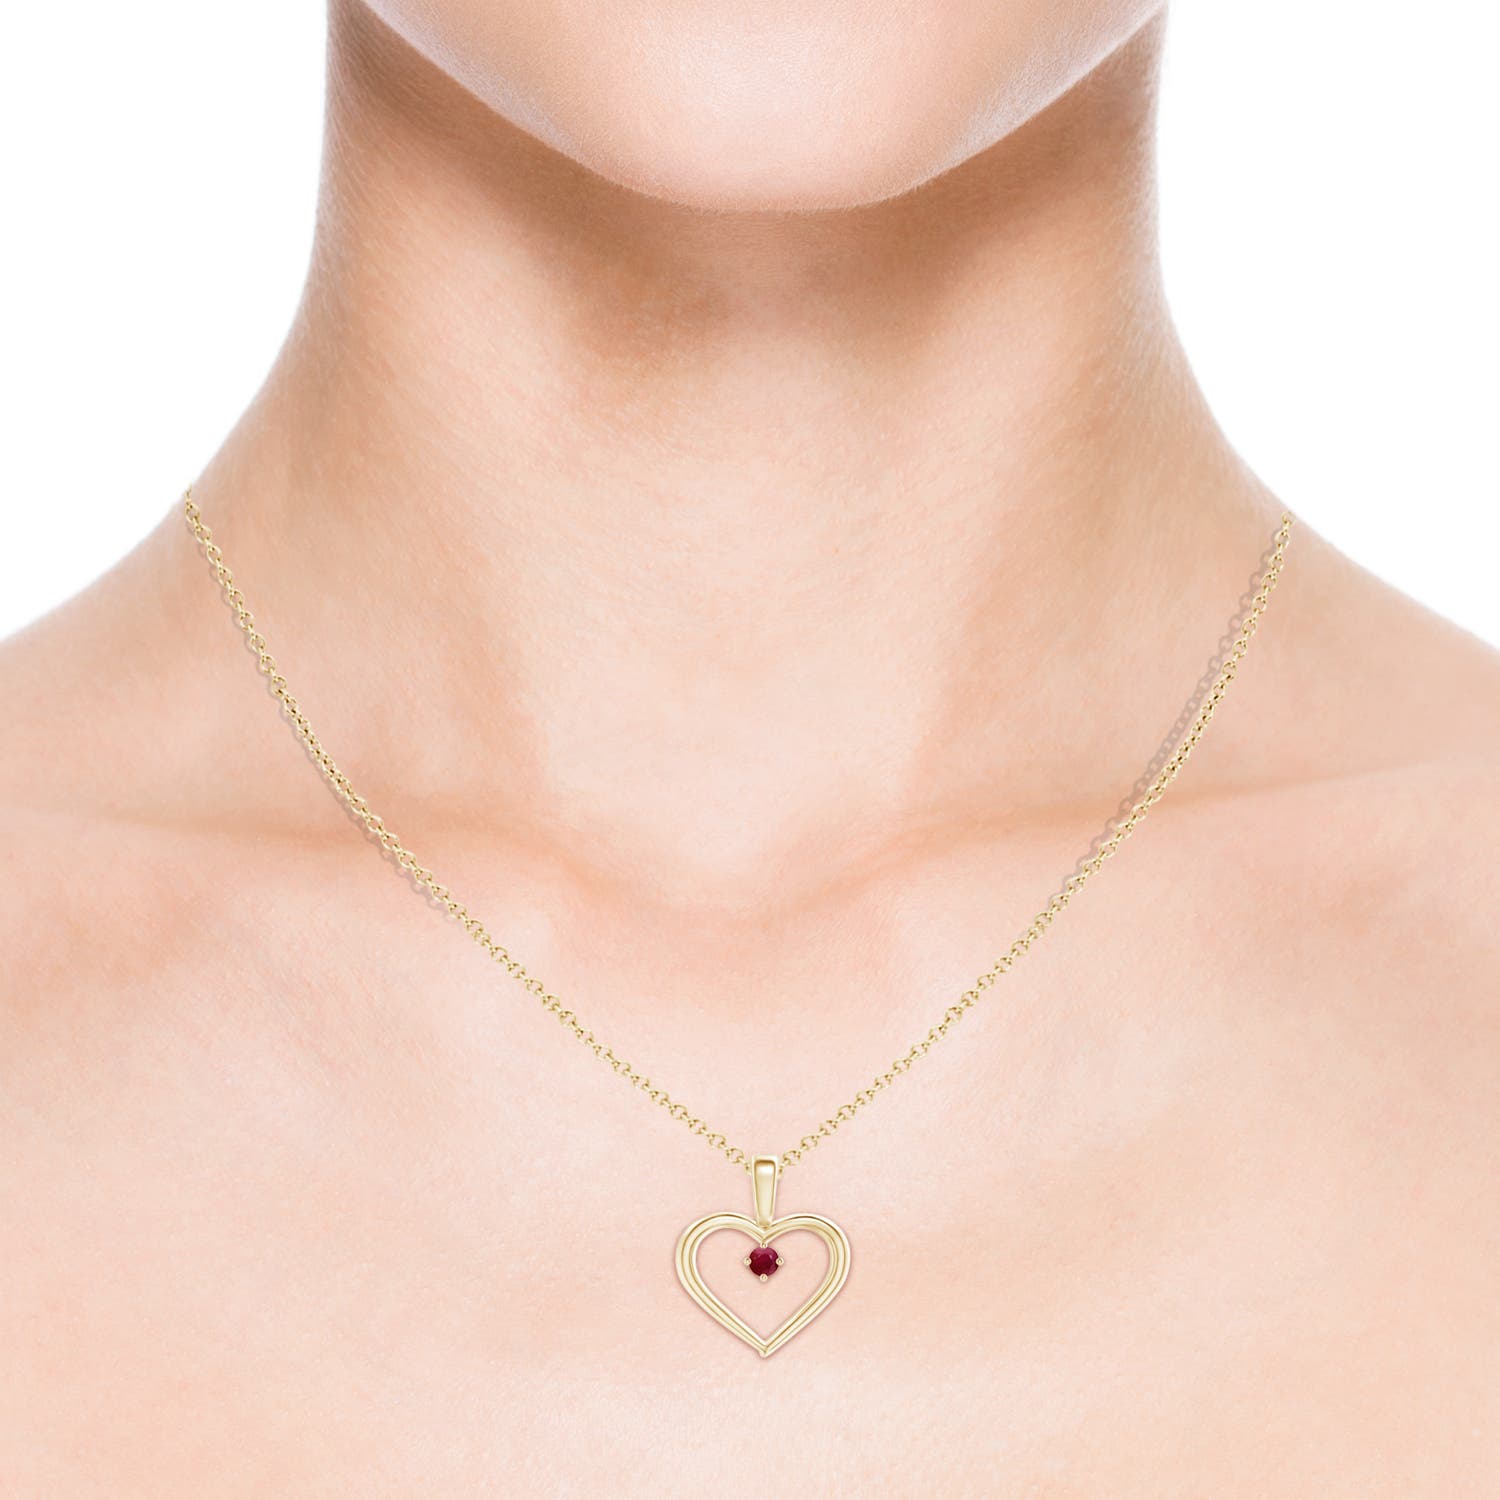 A - Ruby / 0.09 CT / 14 KT Yellow Gold